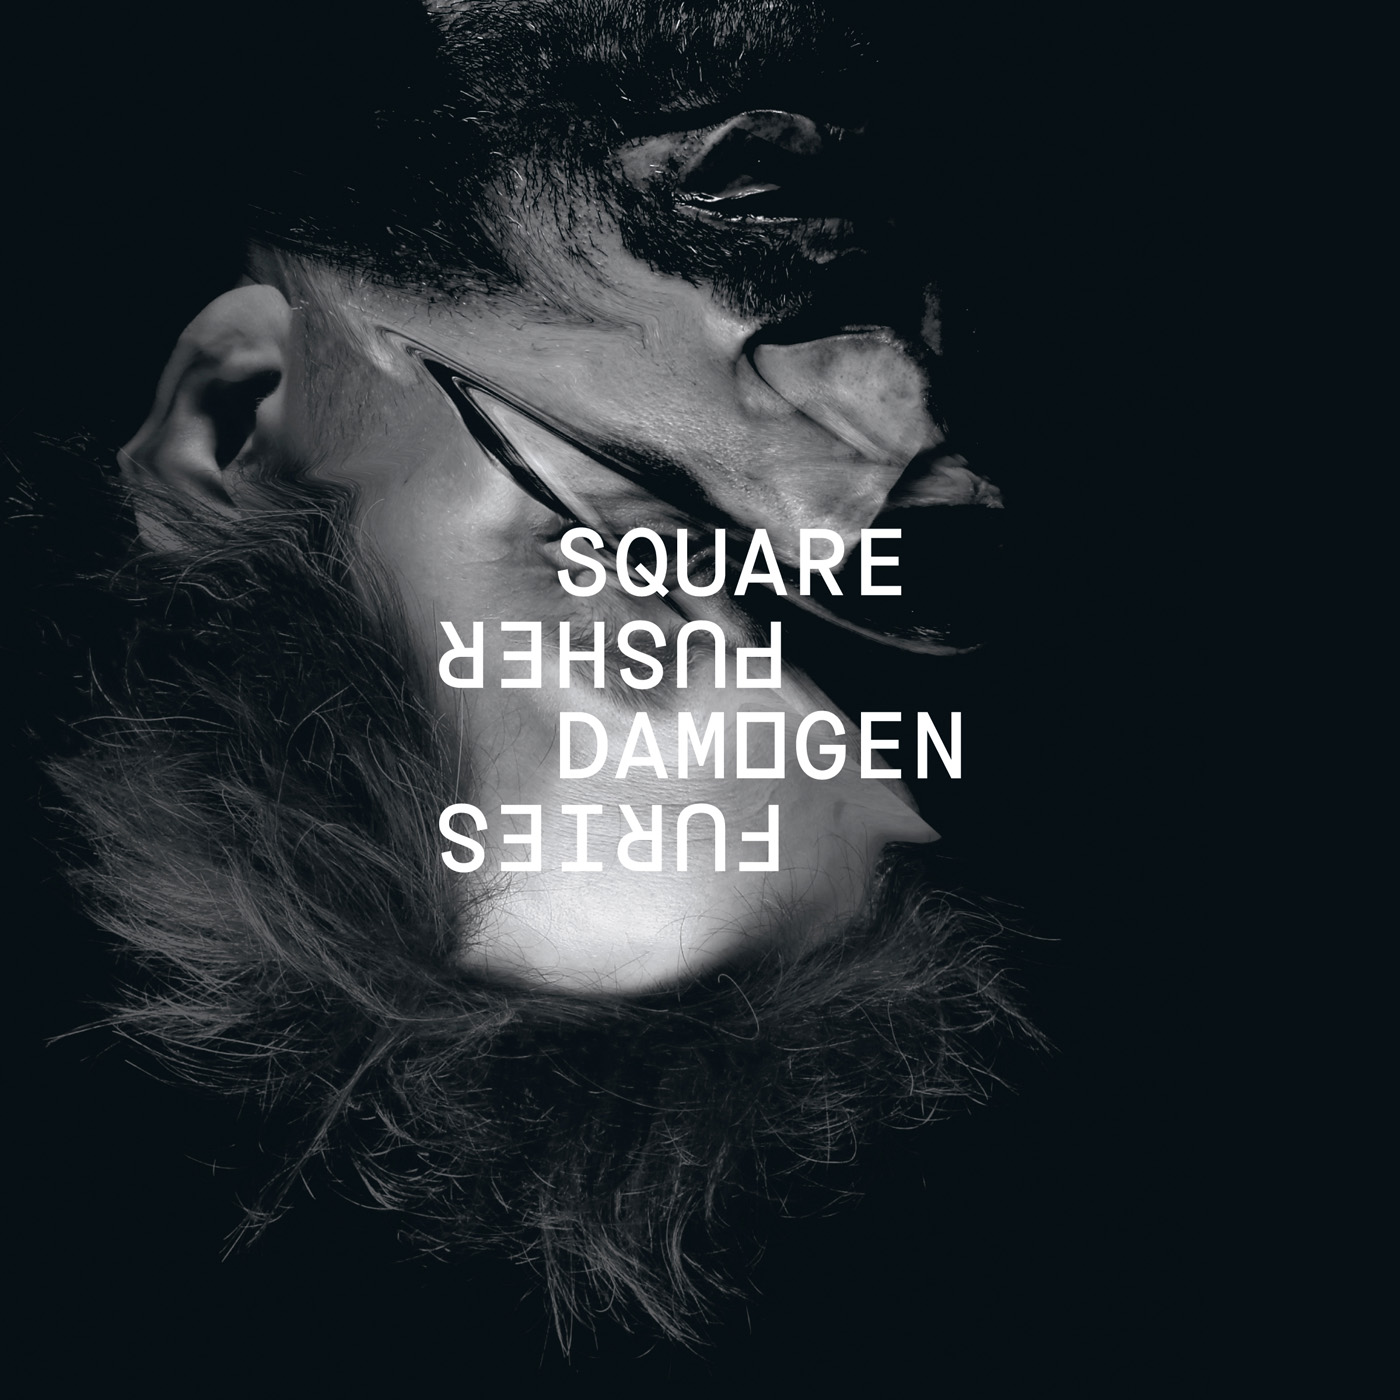 Squarepusher Shares New Virtual Reality Music Video Experience for their single “Stor Eiglass,”